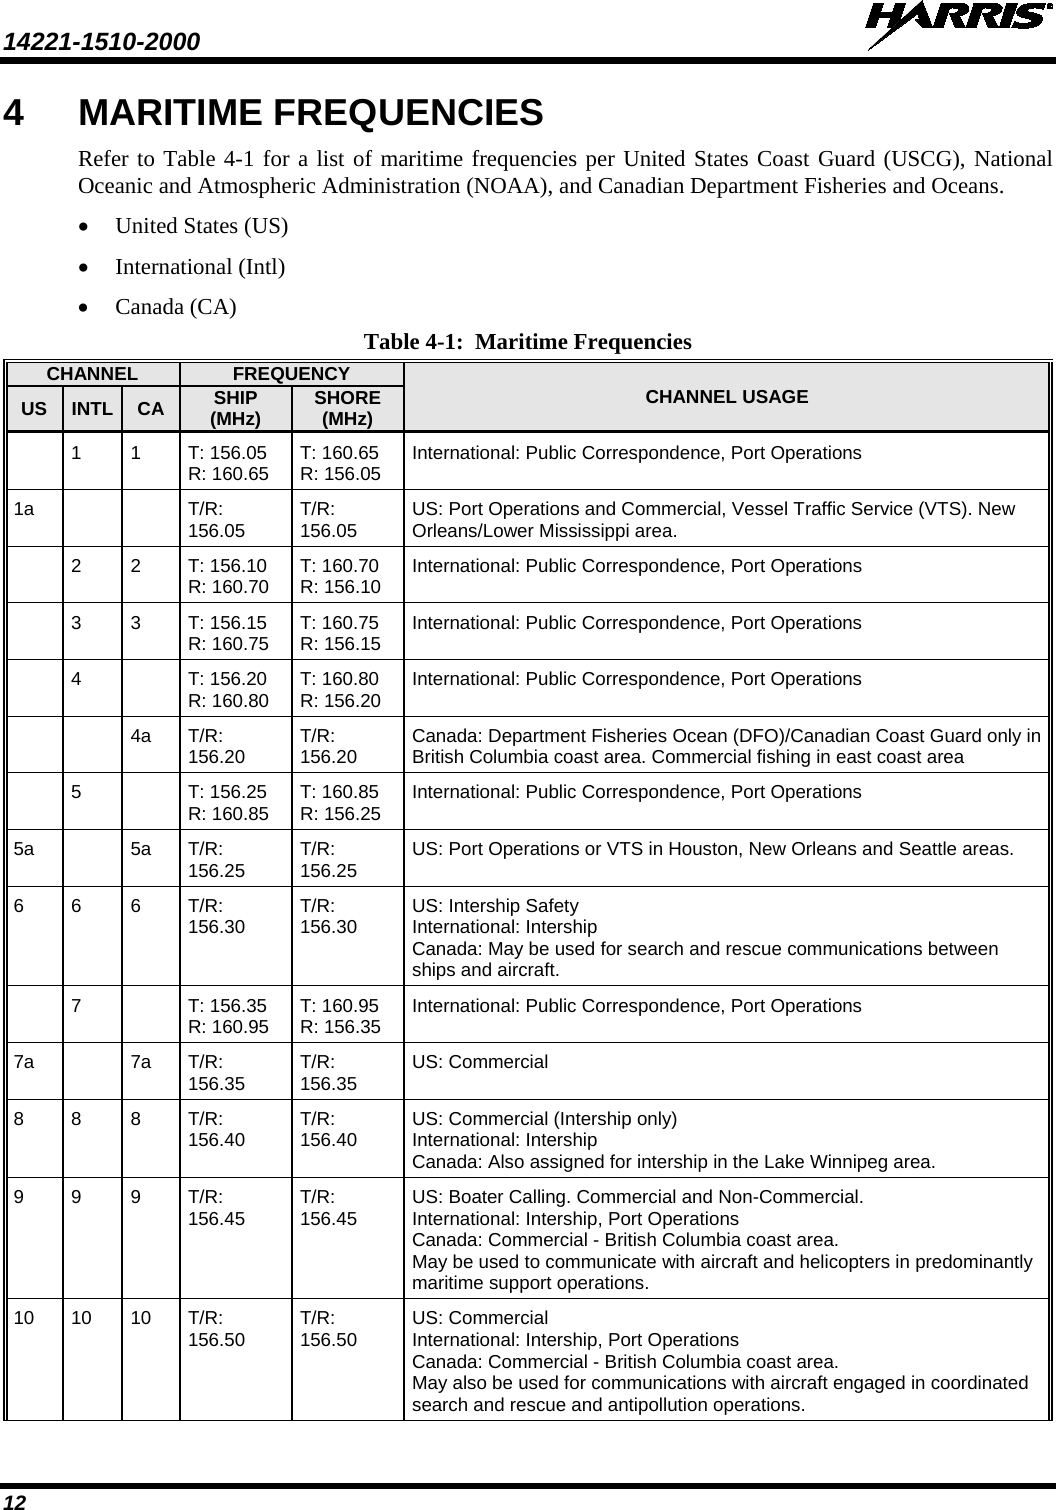 14221-1510-2000   12 4  MARITIME FREQUENCIES Refer to Table 4-1 for a list of maritime frequencies per United States Coast Guard (USCG), National Oceanic and Atmospheric Administration (NOAA), and Canadian Department Fisheries and Oceans. • United States (US) • International (Intl) • Canada (CA) Table 4-1:  Maritime Frequencies CHANNEL FREQUENCY CHANNEL USAGE US INTL CA SHIP (MHz) SHORE (MHz)   1  1  T: 156.05 R: 160.65 T: 160.65 R: 156.05 International: Public Correspondence, Port Operations 1a      T/R: 156.05 T/R: 156.05 US: Port Operations and Commercial, Vessel Traffic Service (VTS). New Orleans/Lower Mississippi area.   2 2 T: 156.10 R: 160.70 T: 160.70  R: 156.10 International: Public Correspondence, Port Operations  3 3 T: 156.15 R: 160.75 T: 160.75 R: 156.15 International: Public Correspondence, Port Operations  4  T: 156.20  R: 160.80 T: 160.80  R: 156.20 International: Public Correspondence, Port Operations     4a T/R: 156.20 T/R: 156.20 Canada: Department Fisheries Ocean (DFO)/Canadian Coast Guard only in British Columbia coast area. Commercial fishing in east coast area   5    T: 156.25  R: 160.85 T: 160.85  R: 156.25 International: Public Correspondence, Port Operations 5a  5a T/R: 156.25 T/R: 156.25 US: Port Operations or VTS in Houston, New Orleans and Seattle areas. 6 6 6 T/R: 156.30 T/R: 156.30 US: Intership Safety International: Intership Canada: May be used for search and rescue communications between ships and aircraft.  7  T: 156.35  R: 160.95 T: 160.95  R: 156.35 International: Public Correspondence, Port Operations 7a  7a T/R: 156.35 T/R: 156.35 US: Commercial 8 8 8 T/R: 156.40 T/R: 156.40 US: Commercial (Intership only) International: Intership Canada: Also assigned for intership in the Lake Winnipeg area. 9 9 9 T/R: 156.45 T/R: 156.45 US: Boater Calling. Commercial and Non-Commercial. International: Intership, Port Operations Canada: Commercial - British Columbia coast area. May be used to communicate with aircraft and helicopters in predominantly maritime support operations. 10 10 10 T/R: 156.50 T/R: 156.50 US: Commercial  International: Intership, Port Operations Canada: Commercial - British Columbia coast area. May also be used for communications with aircraft engaged in coordinated search and rescue and antipollution operations. 